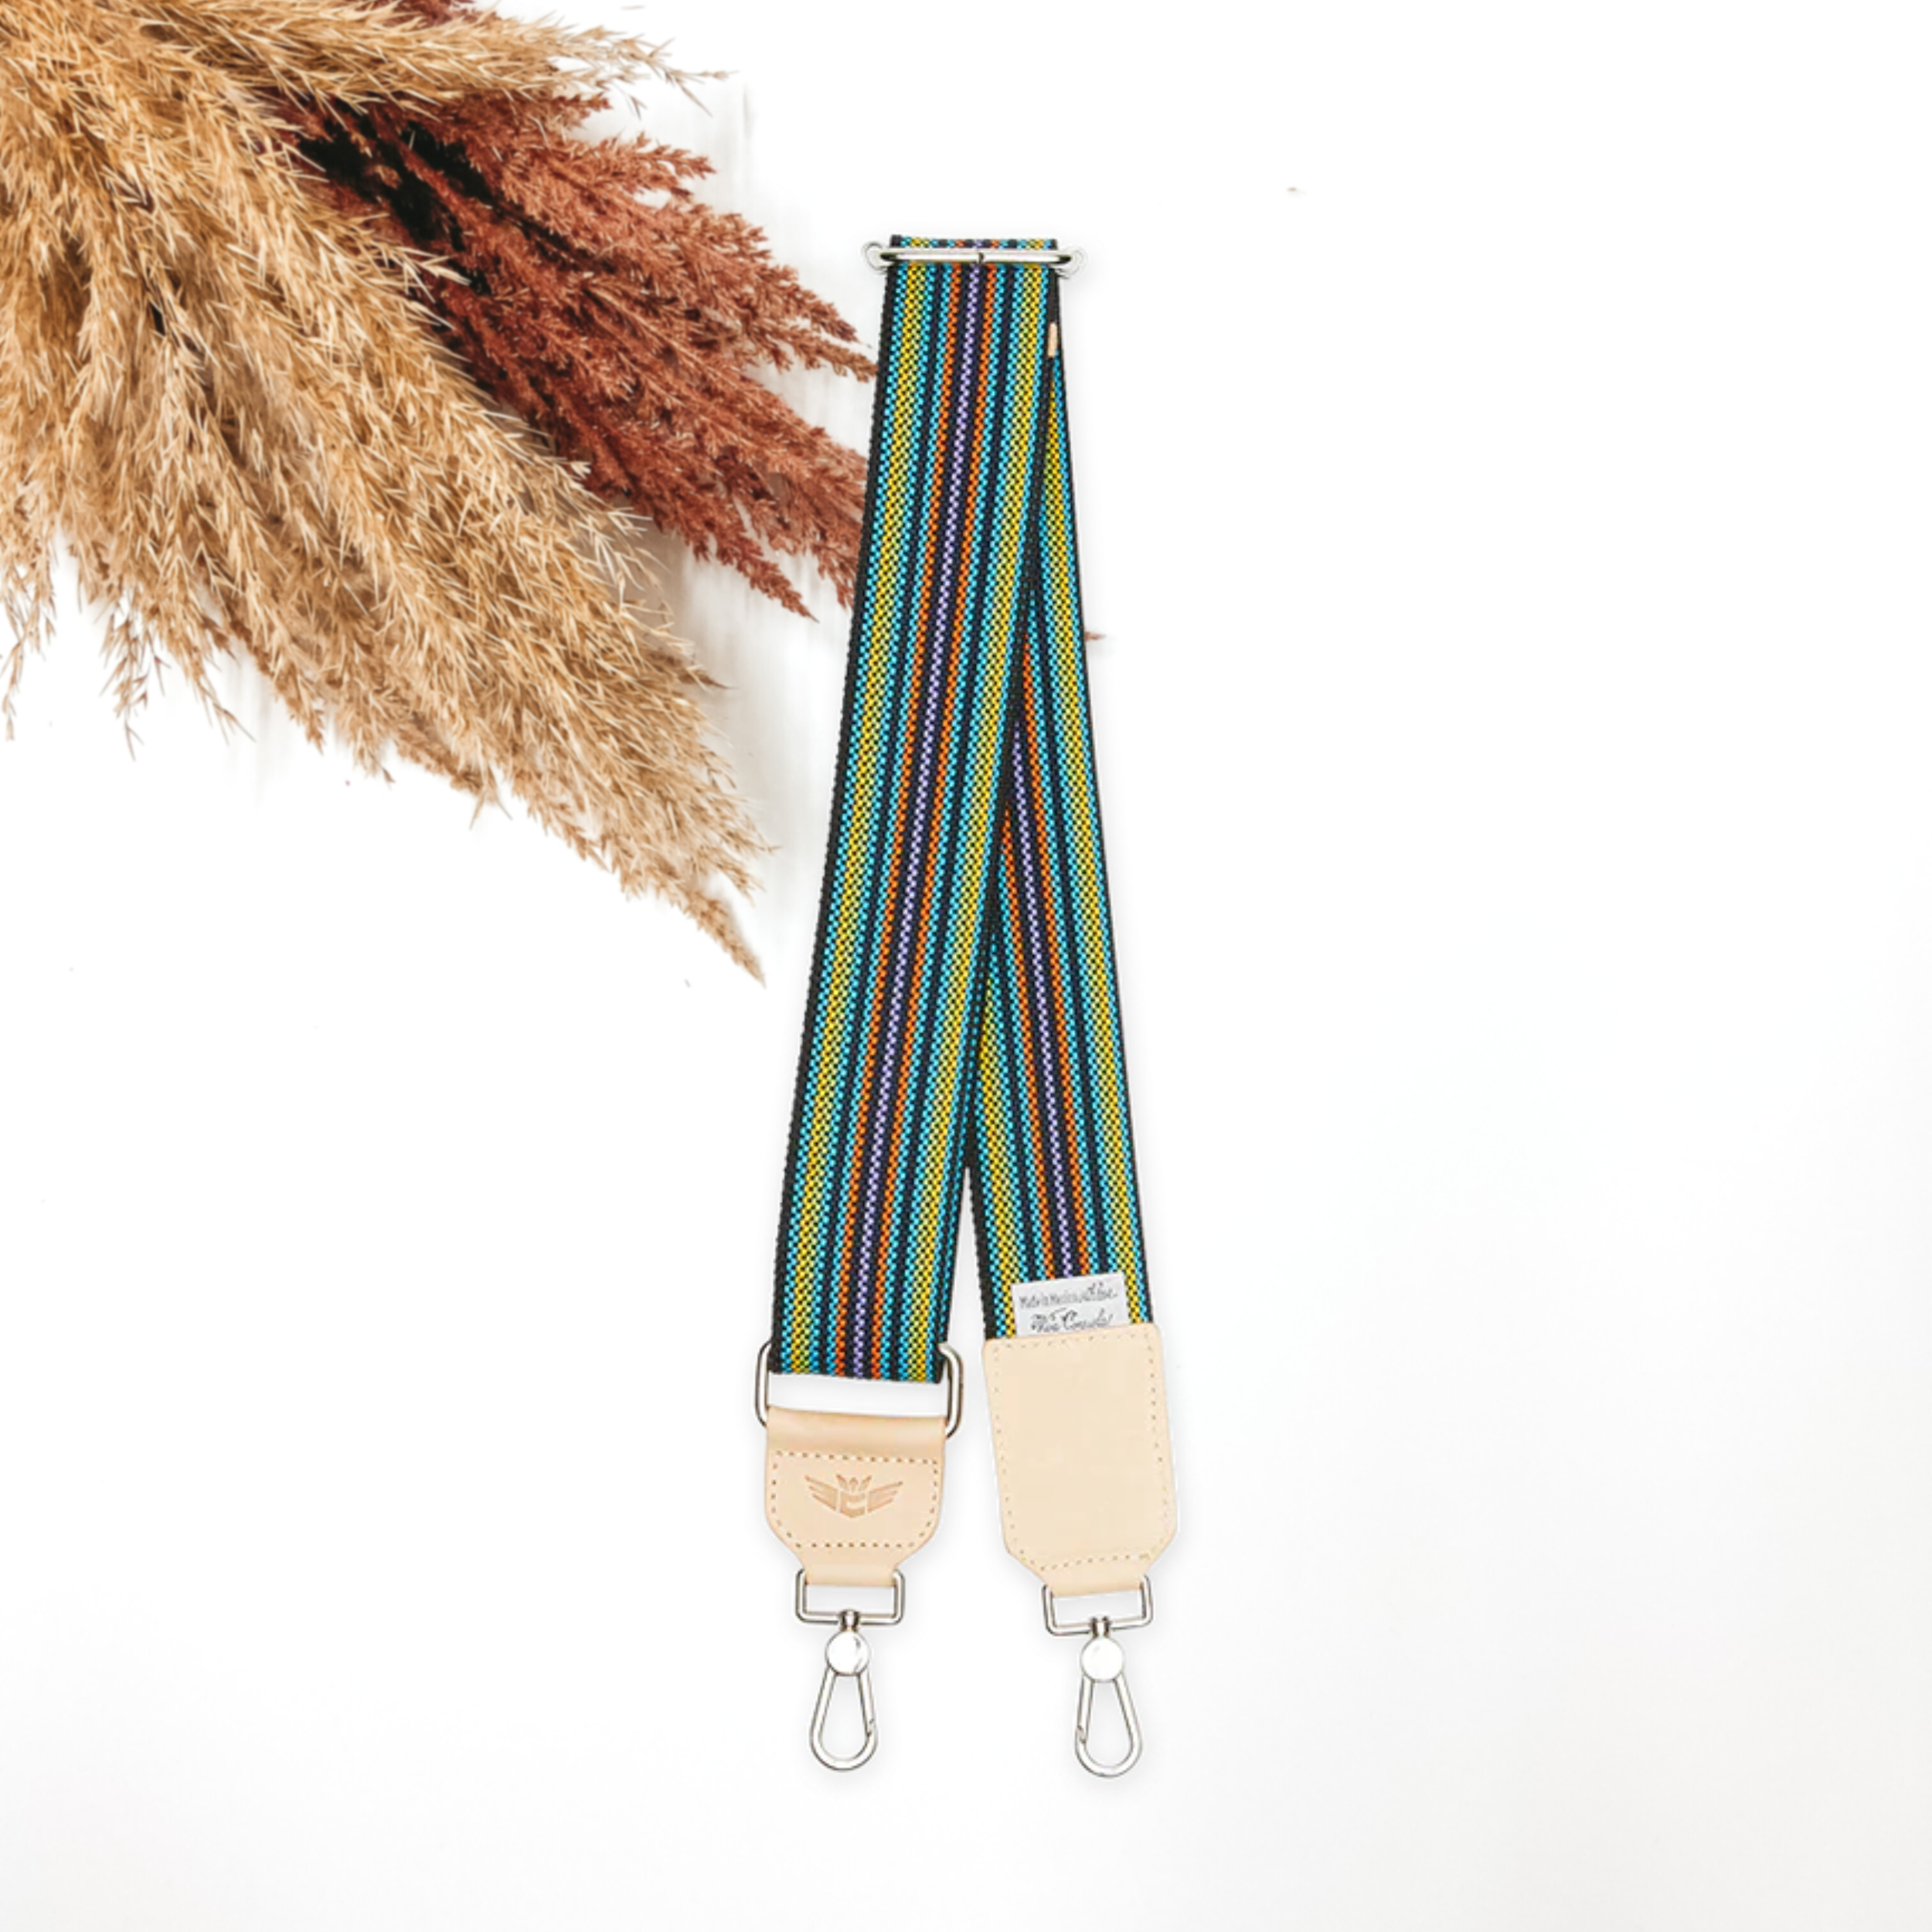 A woven multicolored striped purse strap that has a main color of black. This purse strap is pictured on a white background with tan and brown pompous grass in the top left corner.